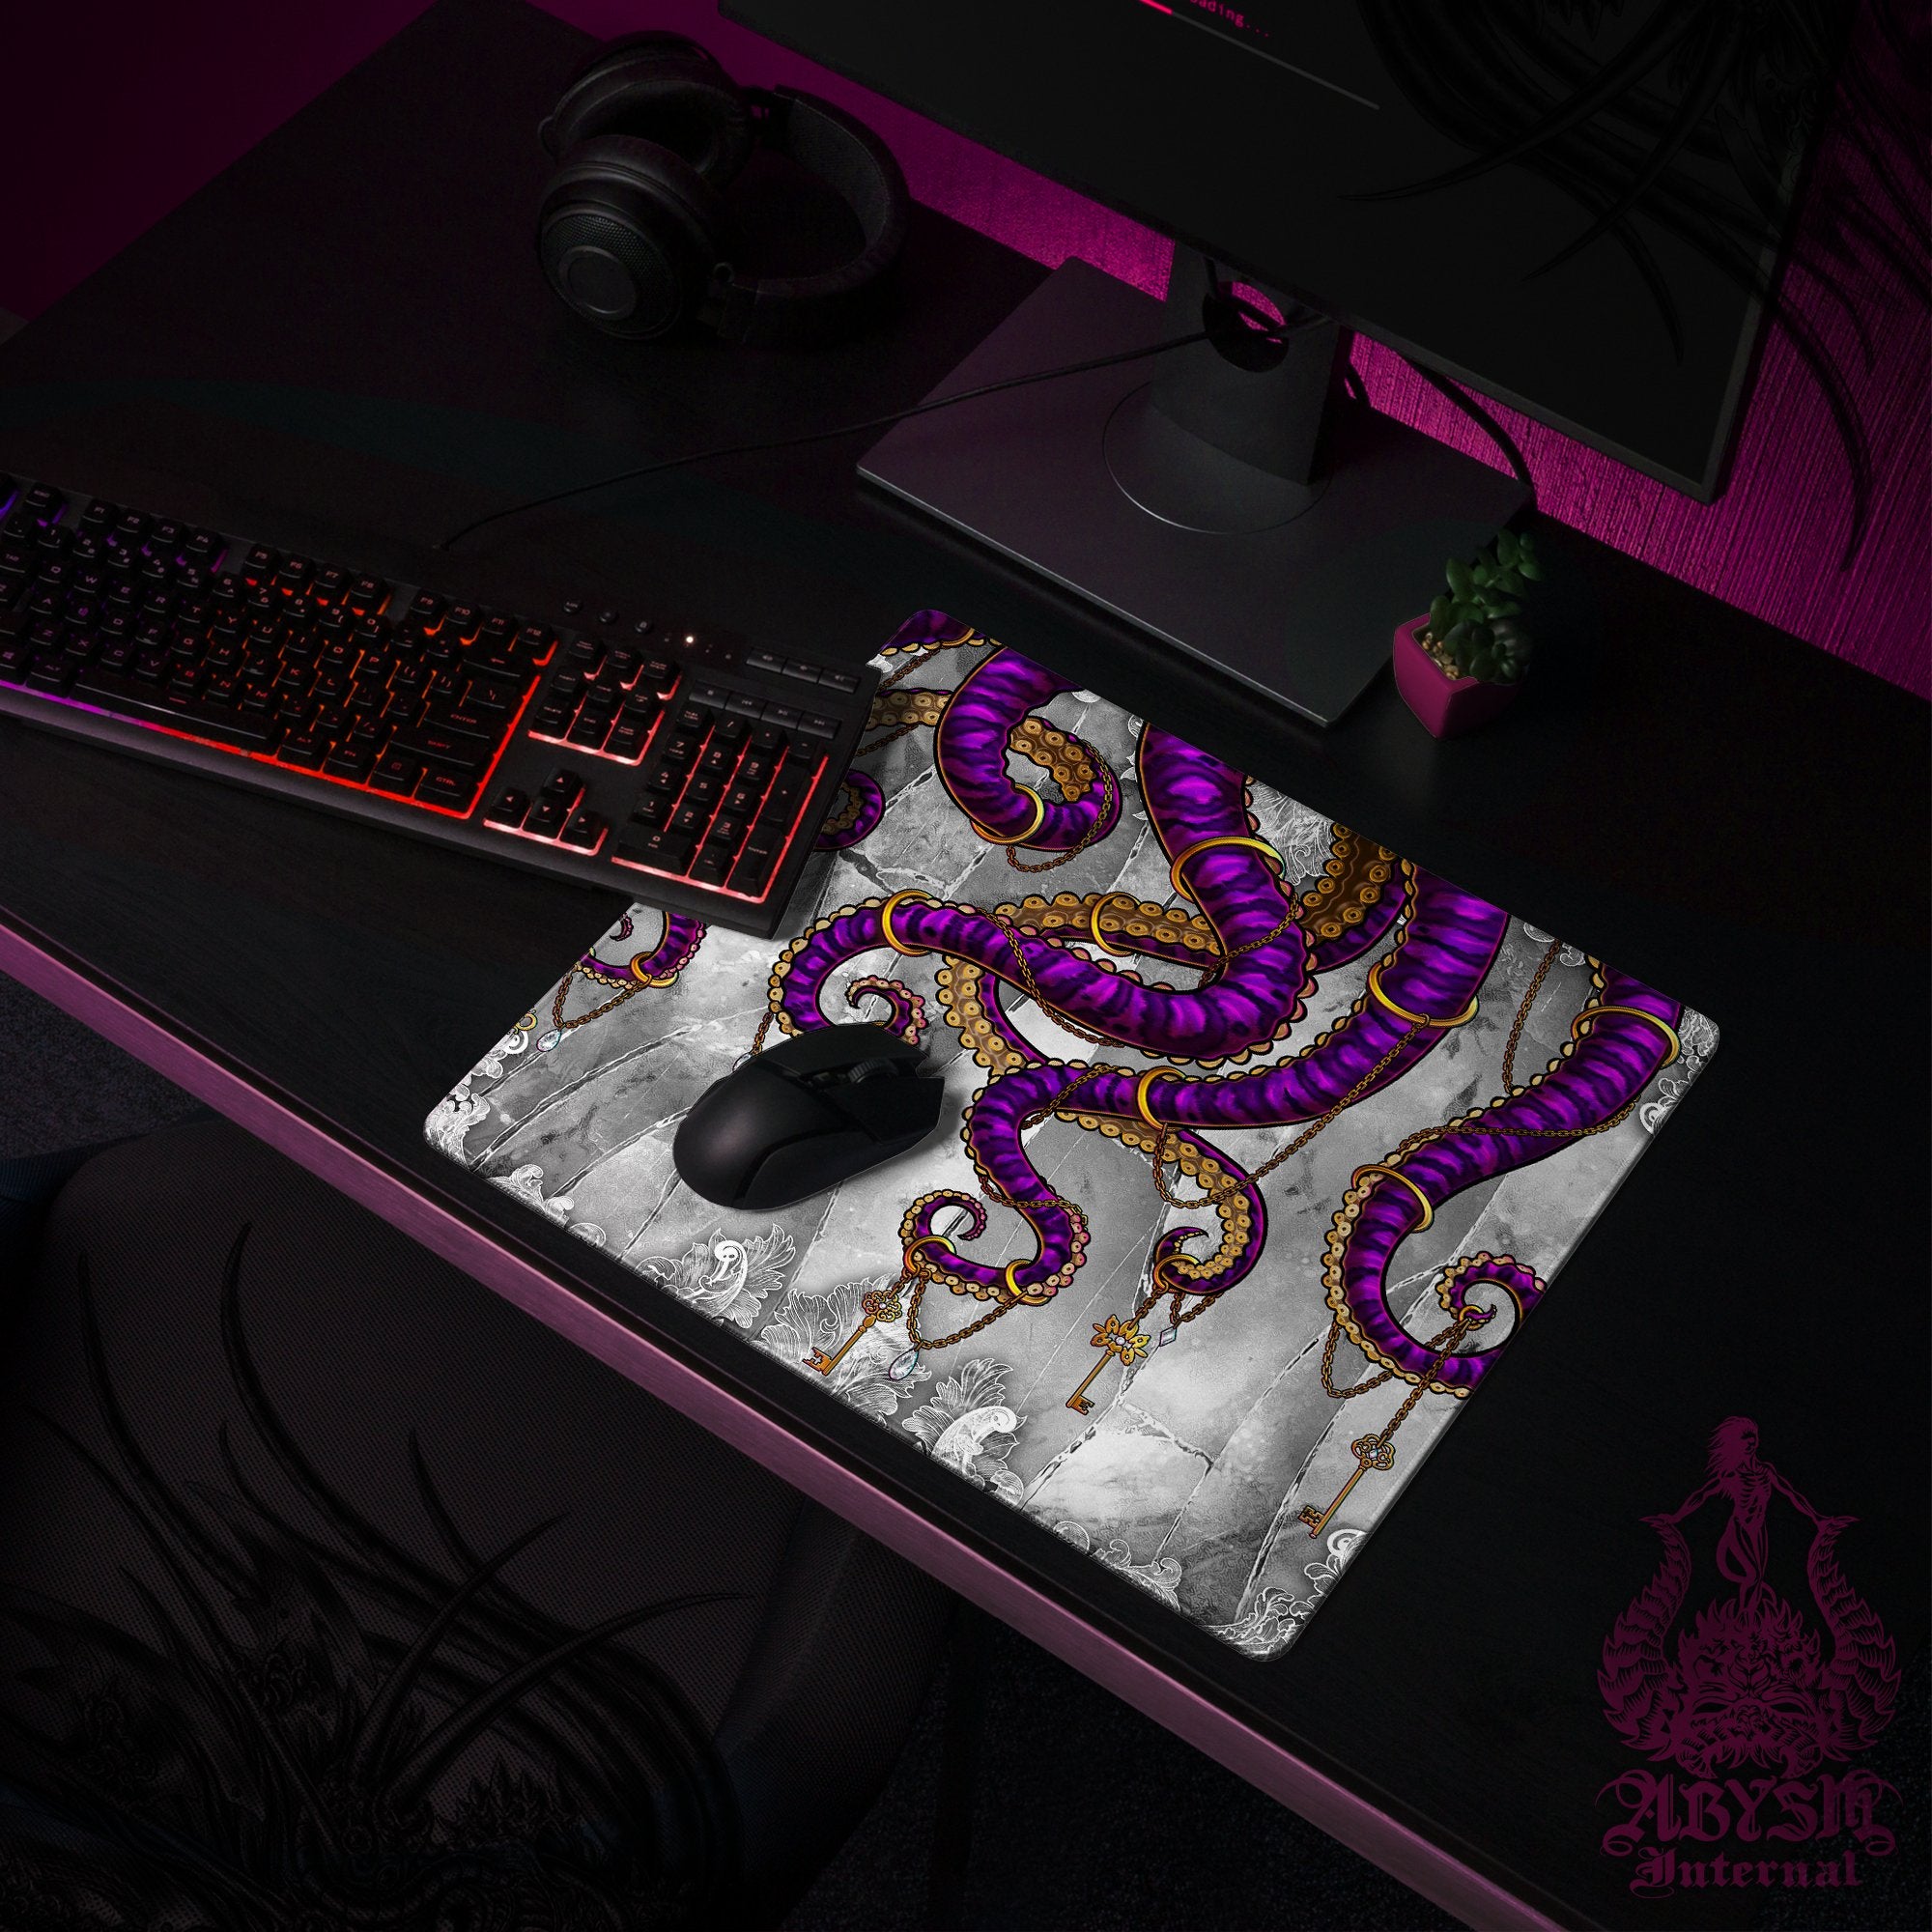 Octopus Workpad, Purple Tentacles Desk Mat, Colorful Gaming Mouse Pad, Gamer Table Protector Cover, Fantasy Art Print - Stone, Sand, 2 Colors - Abysm Internal